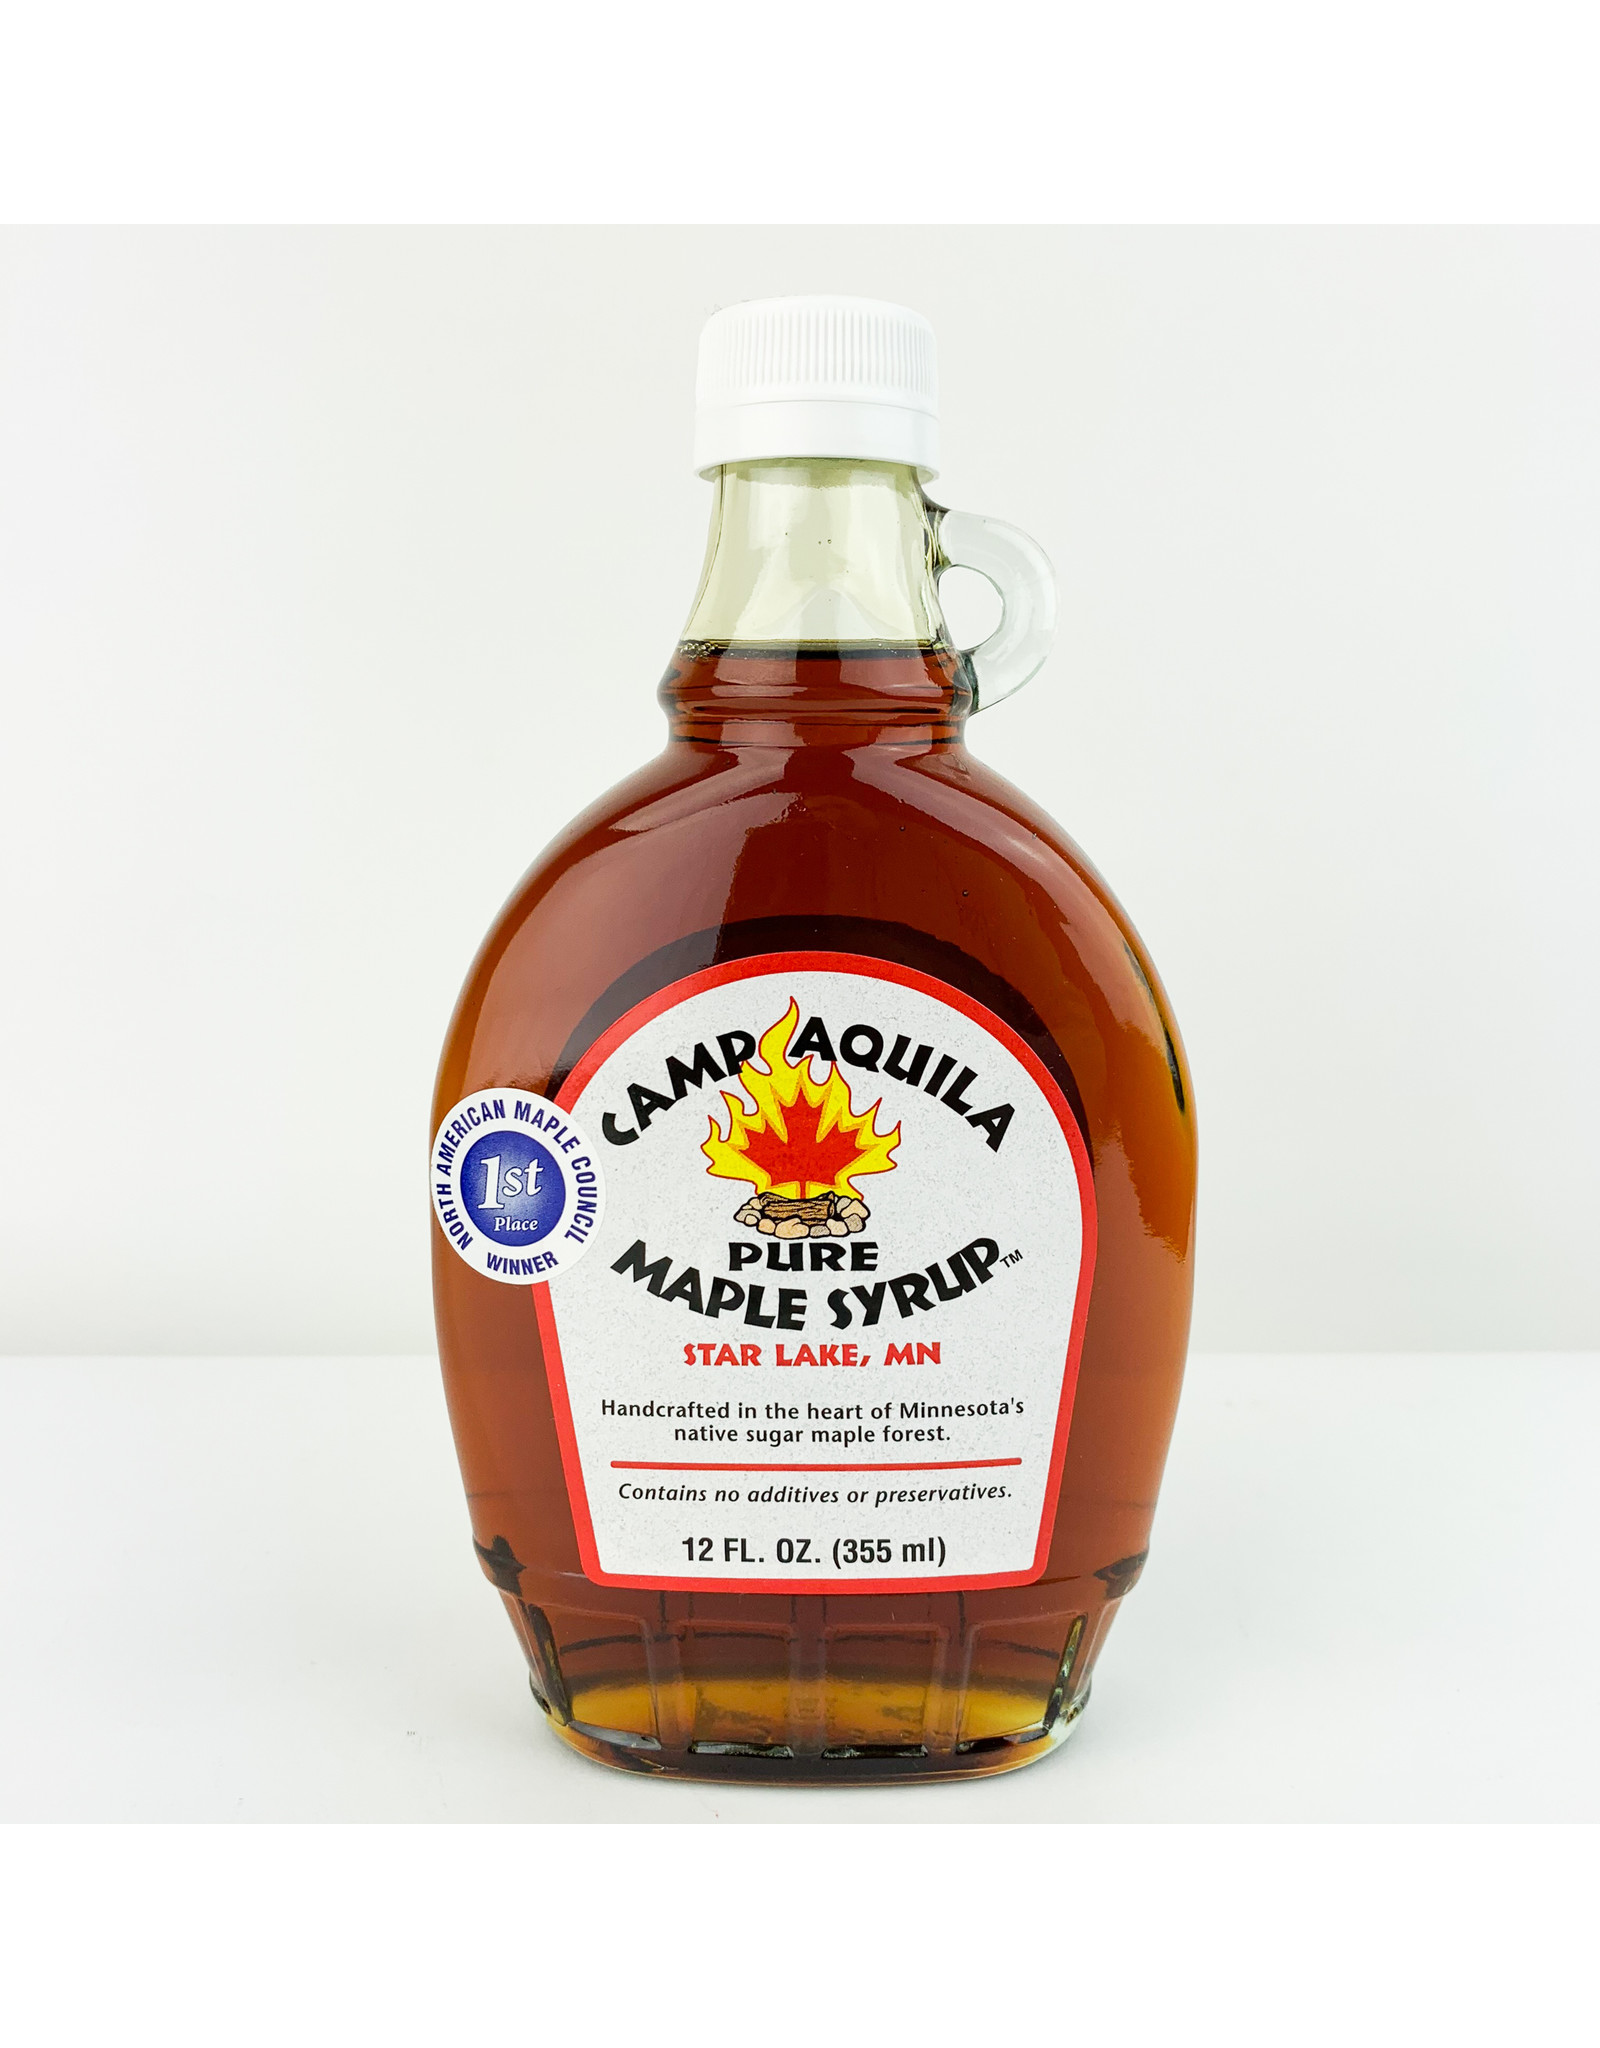 Camp Aquila Pure Maple Syrup Pure maple Syrup 12oz.